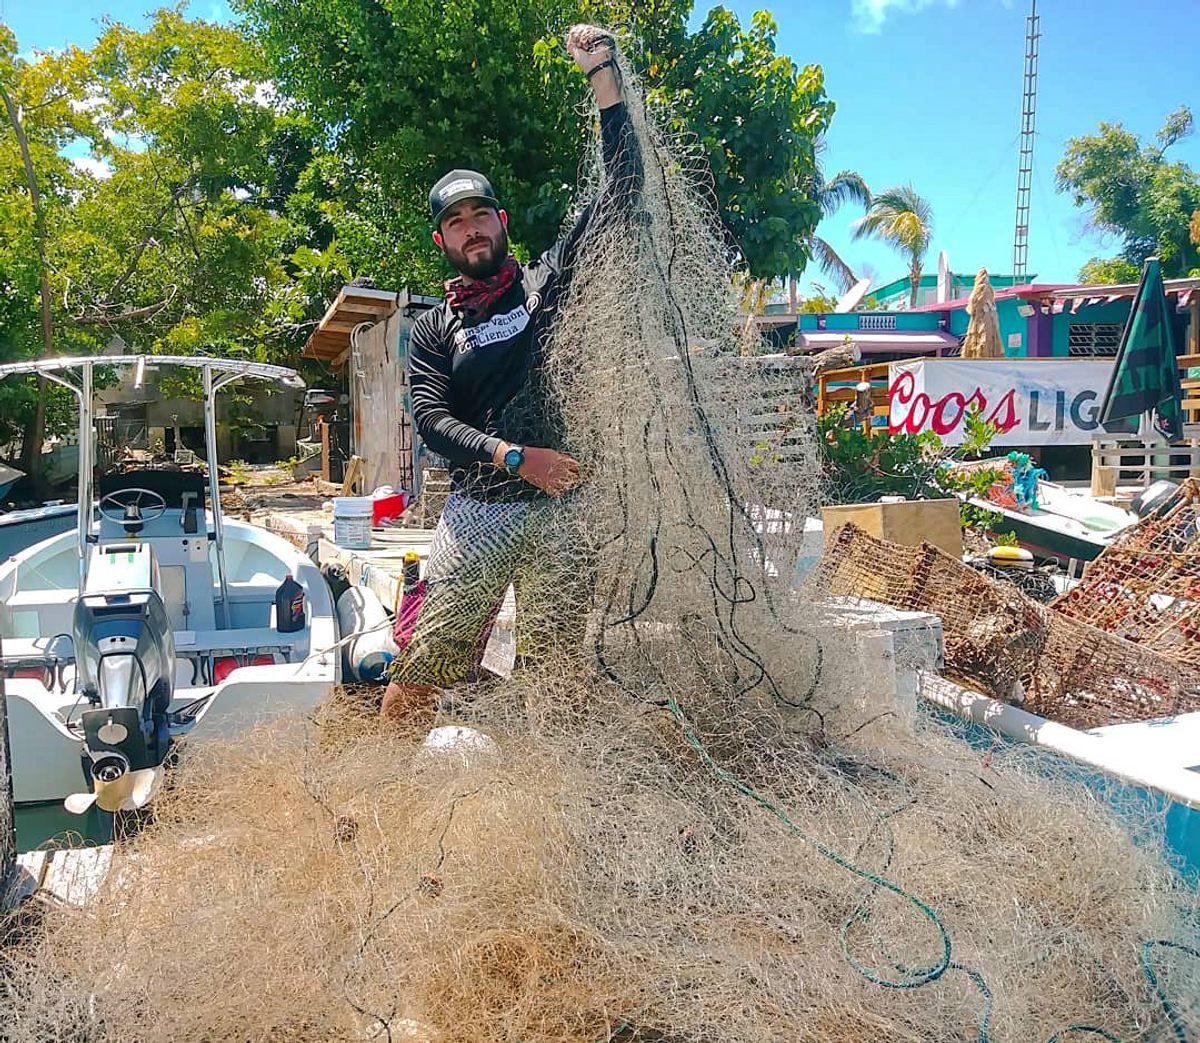 In the wake of Hurricane Maria, an emergency relief project through Conservación ConCiencia paid fishers to collect marine debris and retrieve lost gear, such as this gill net. 